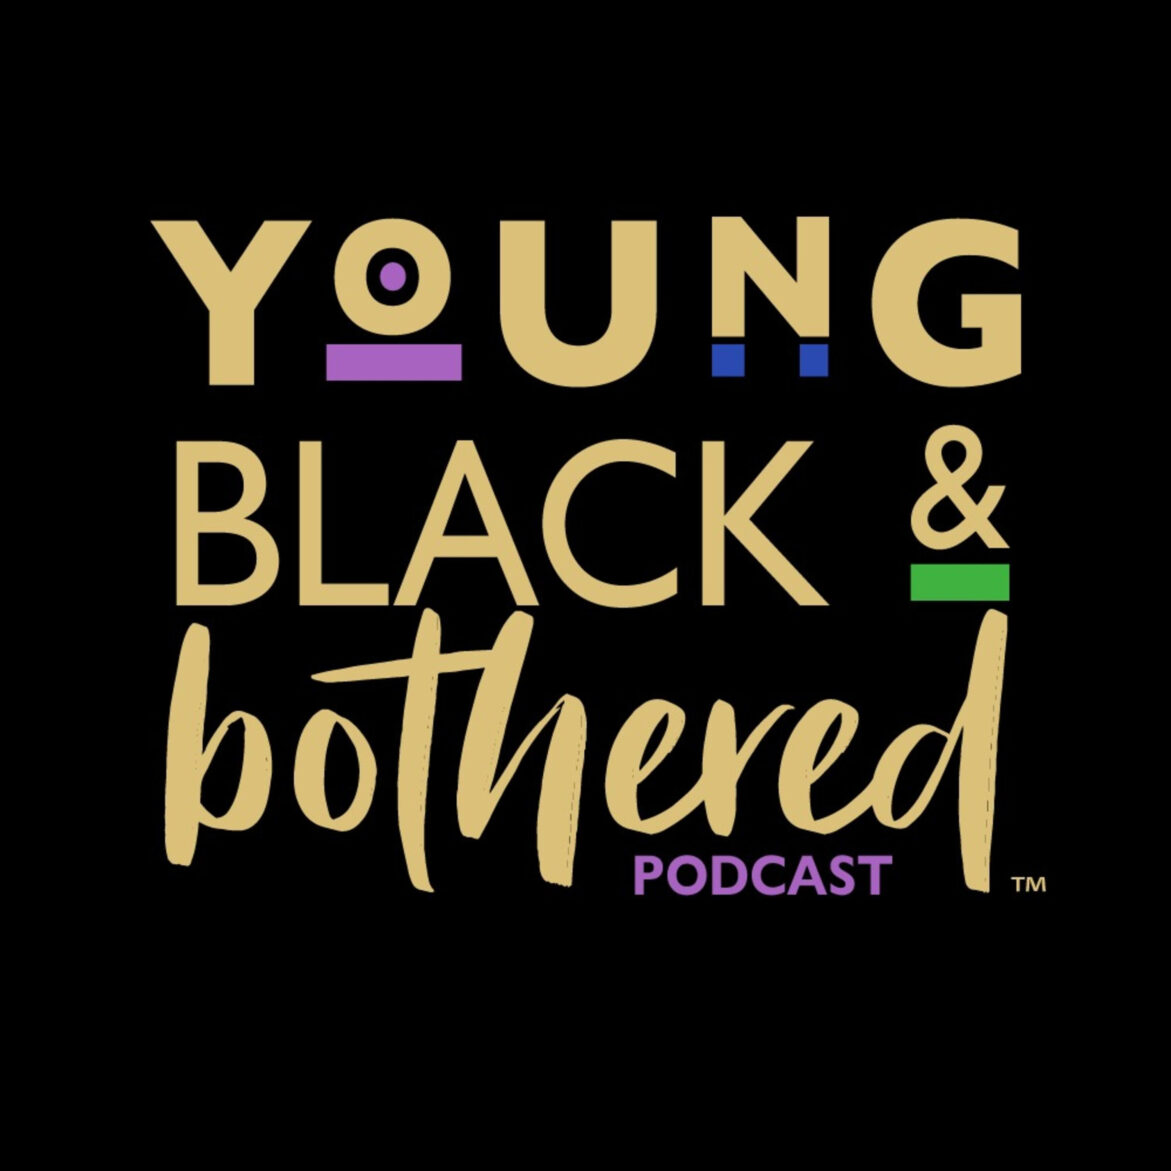 Black Podcasting - 133: Everybody Gets an Apple